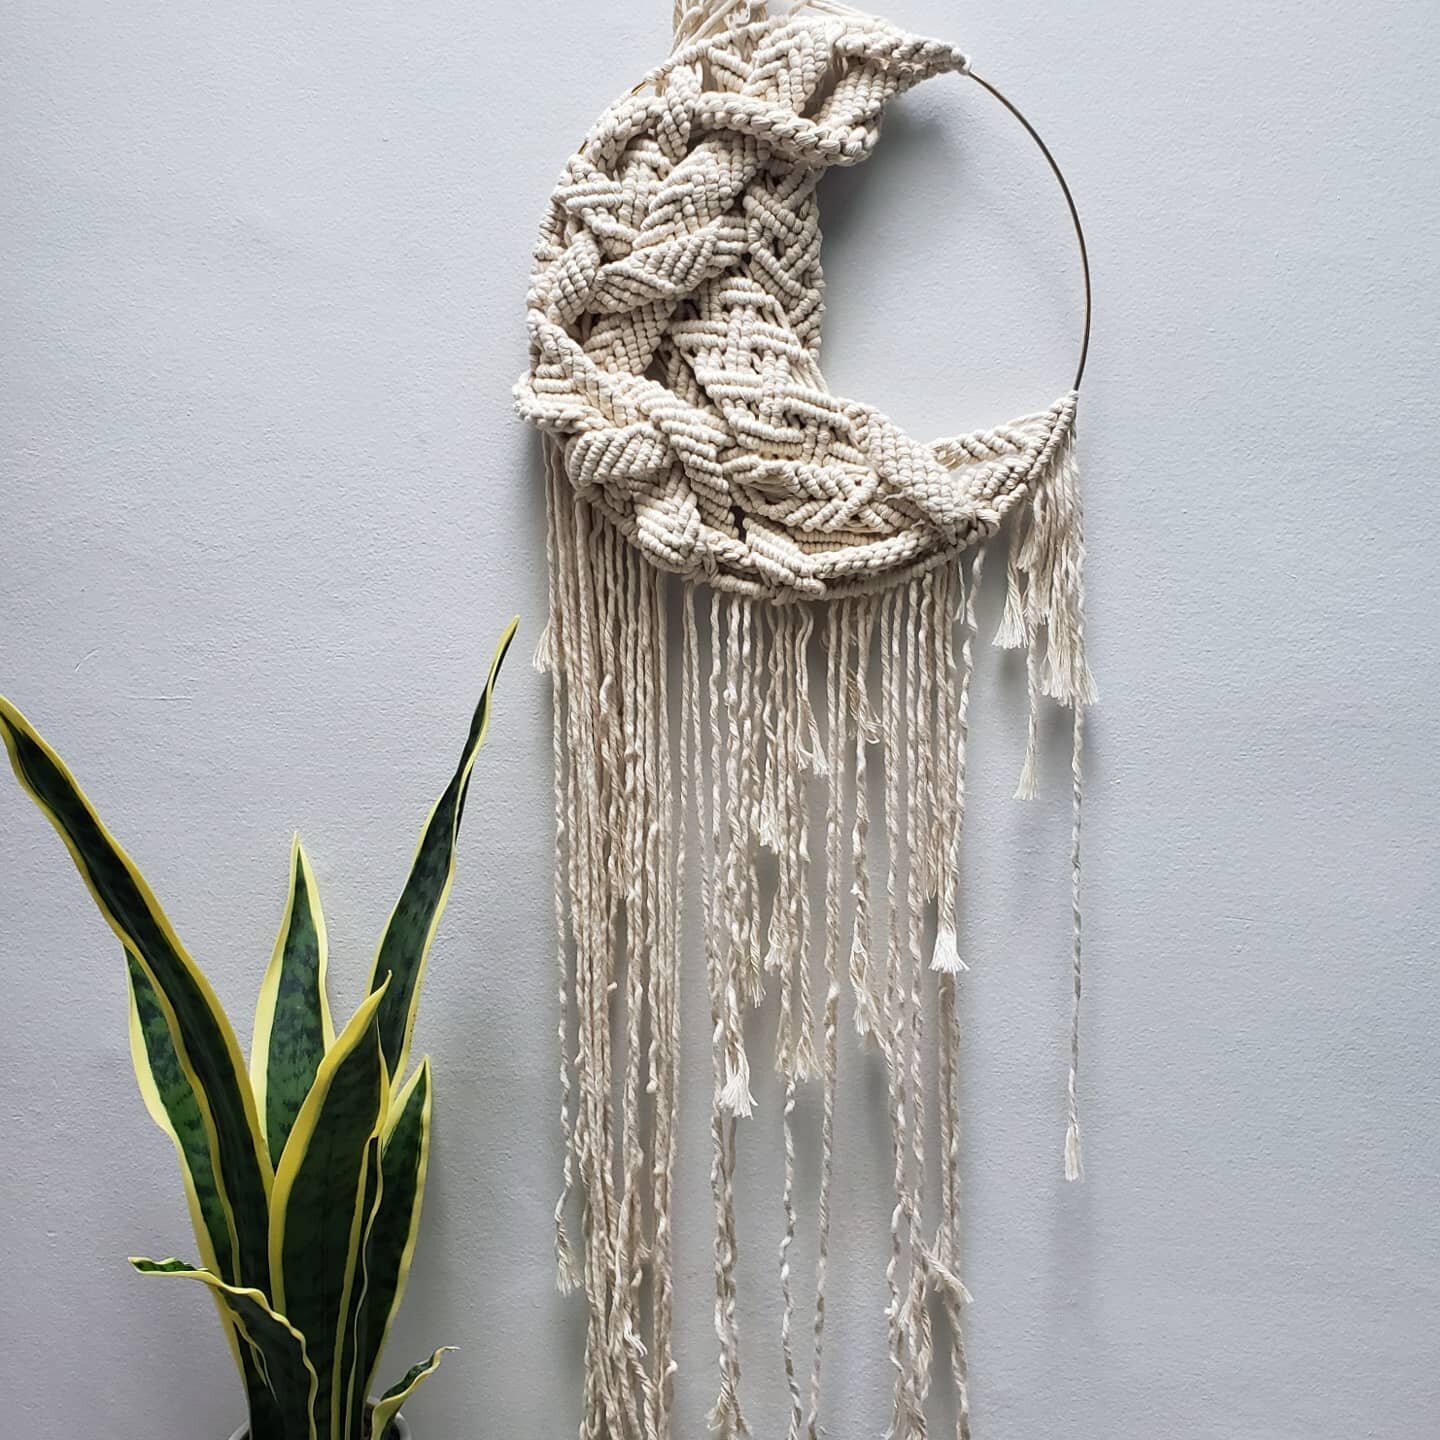 Some moon energy for tonight's full moon in Aries. While not intentional, it has a serpentine vibe. I am a Slytherin...and an Aries.
*
*
*
#baltimore #thebmorecreatives #macramedecor #macramelove #macrame #fiberart #fiberartist #bmore #bmoreart #bmor